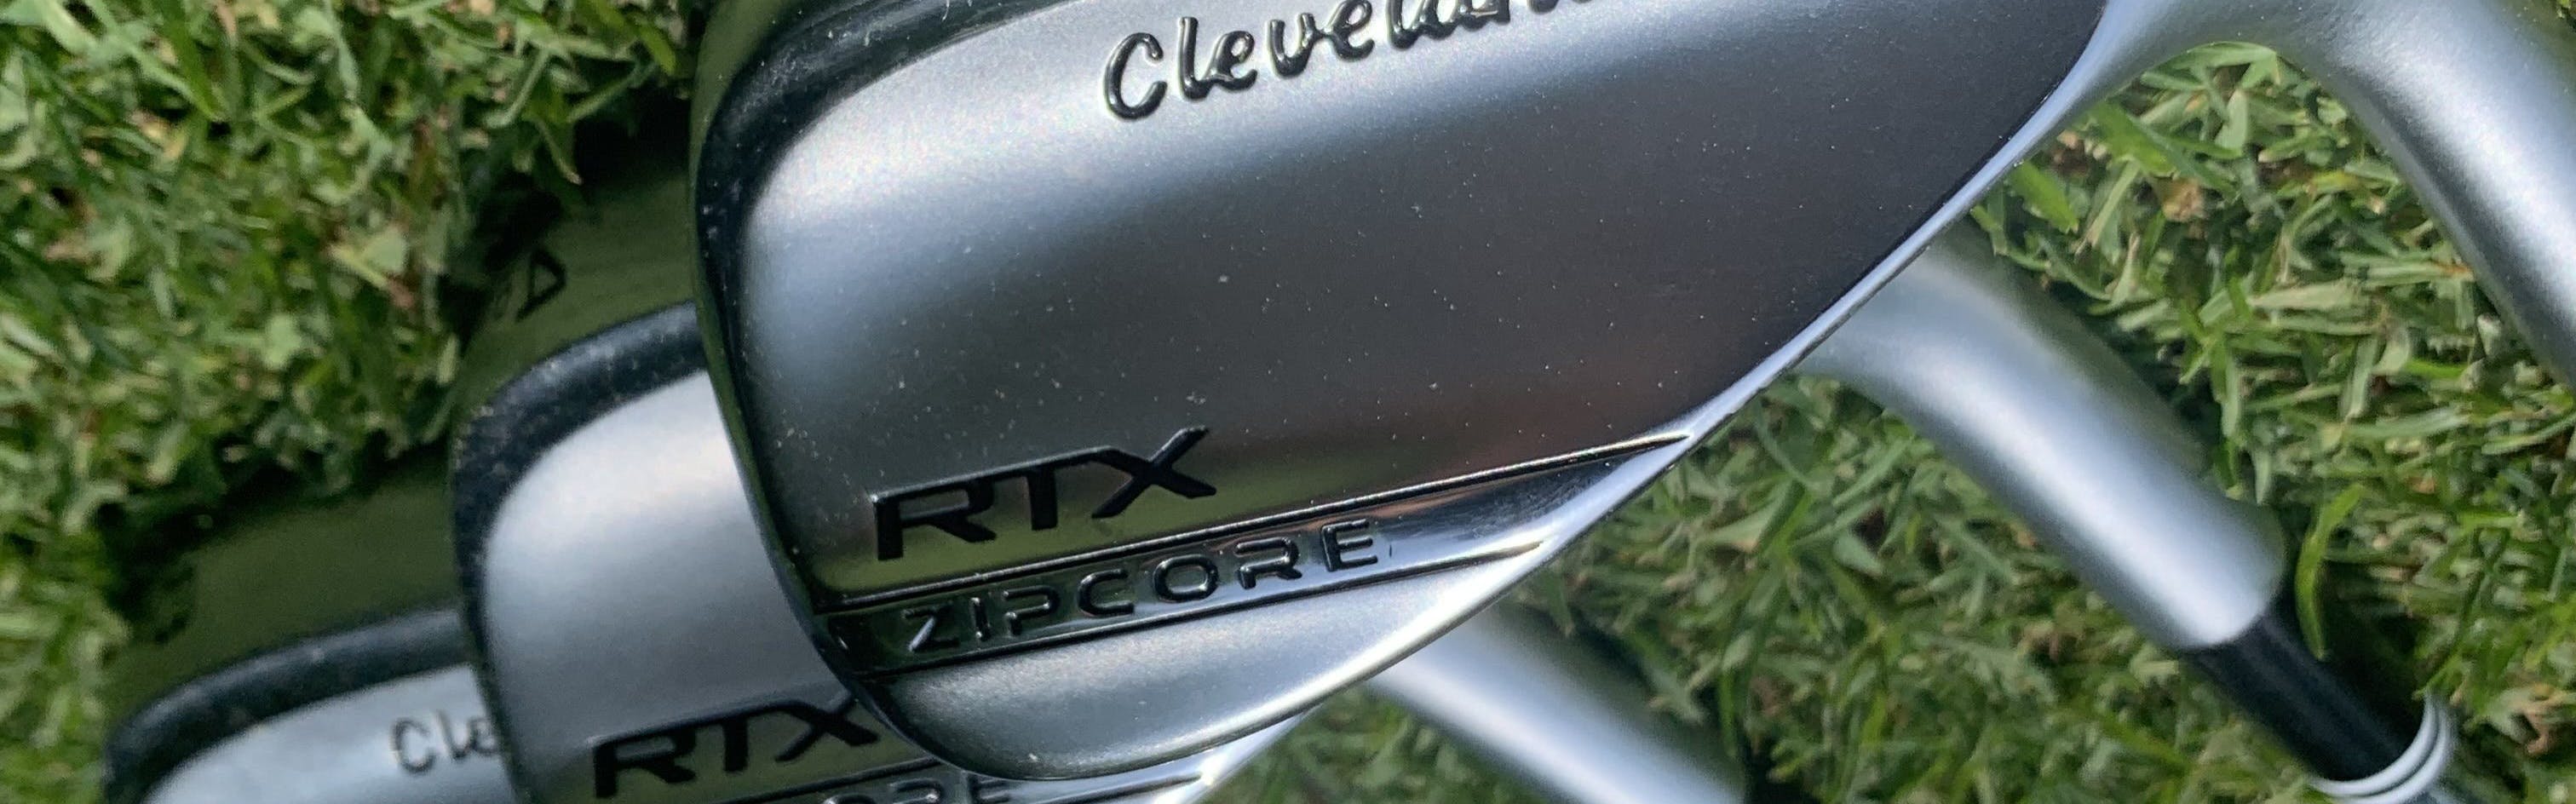 Expert Review: Cleveland RTX Zipcore Tour Satin Wedges | Curated.com